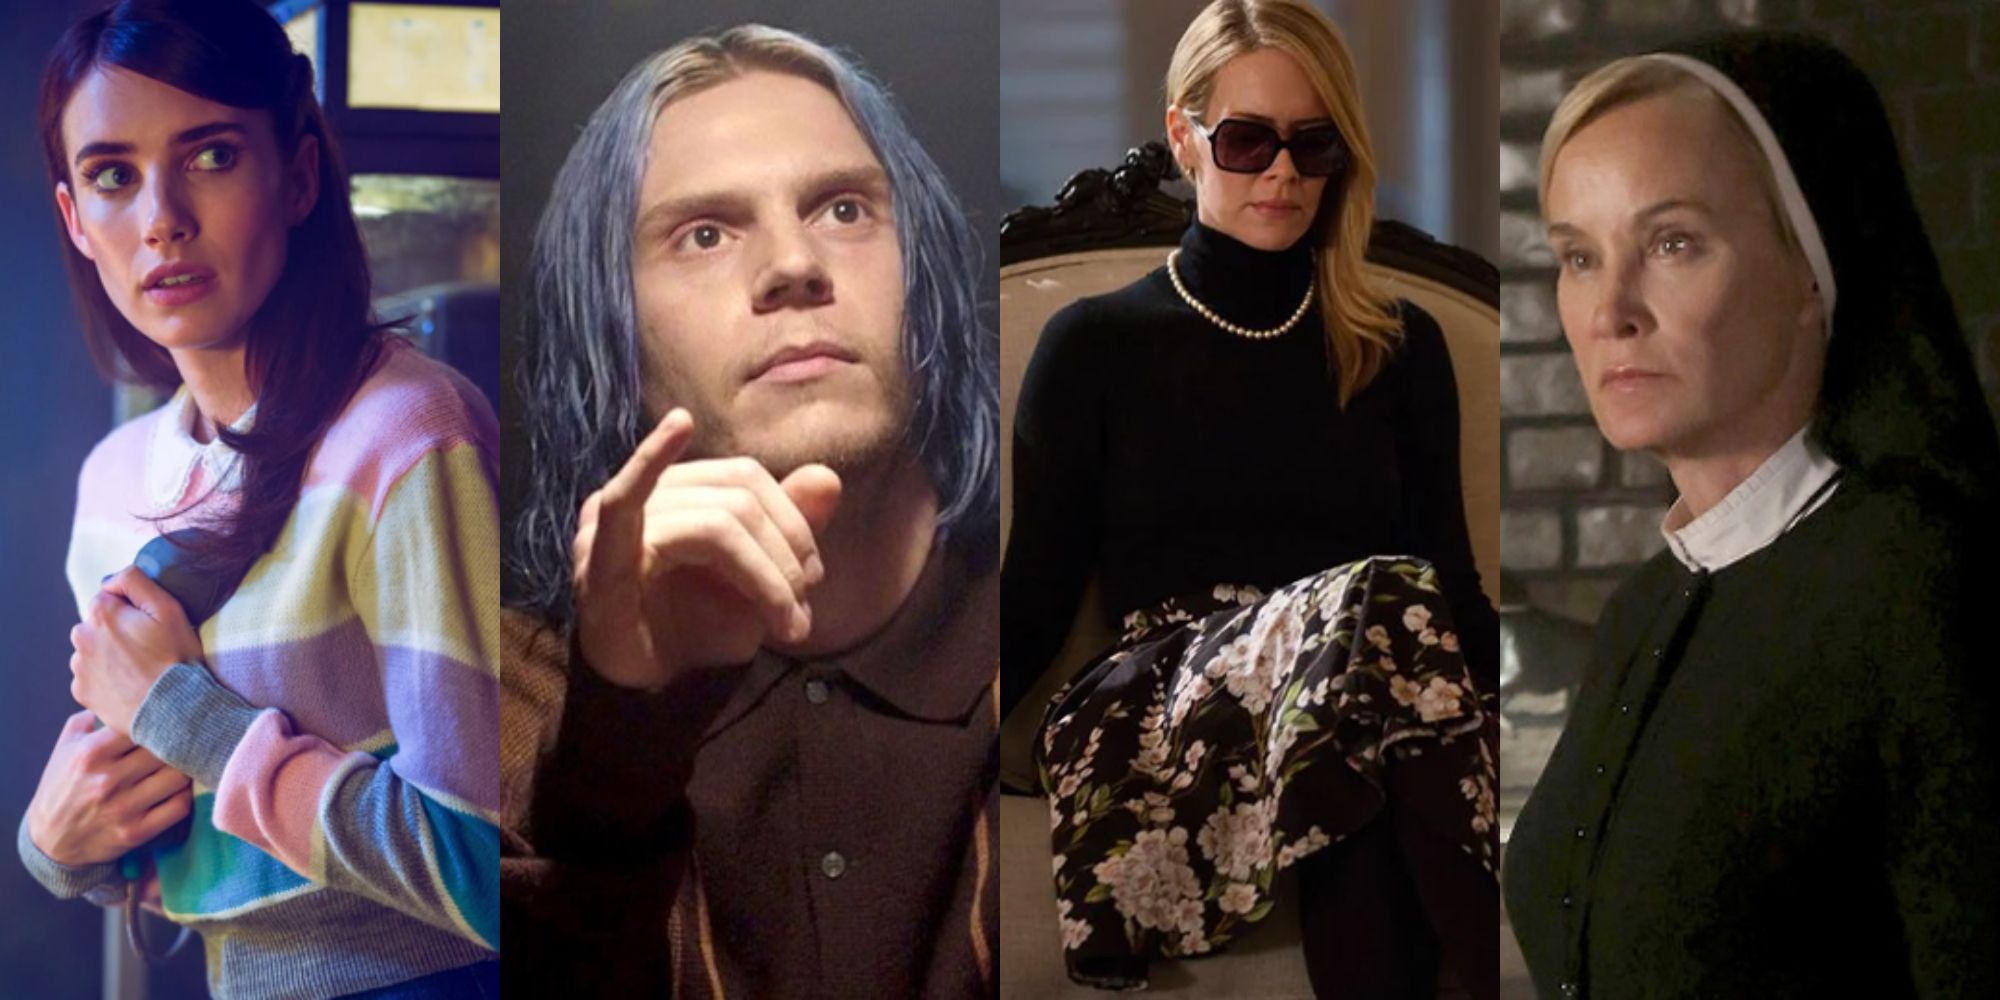 Split image showing characters from different seasons of American Horror Story